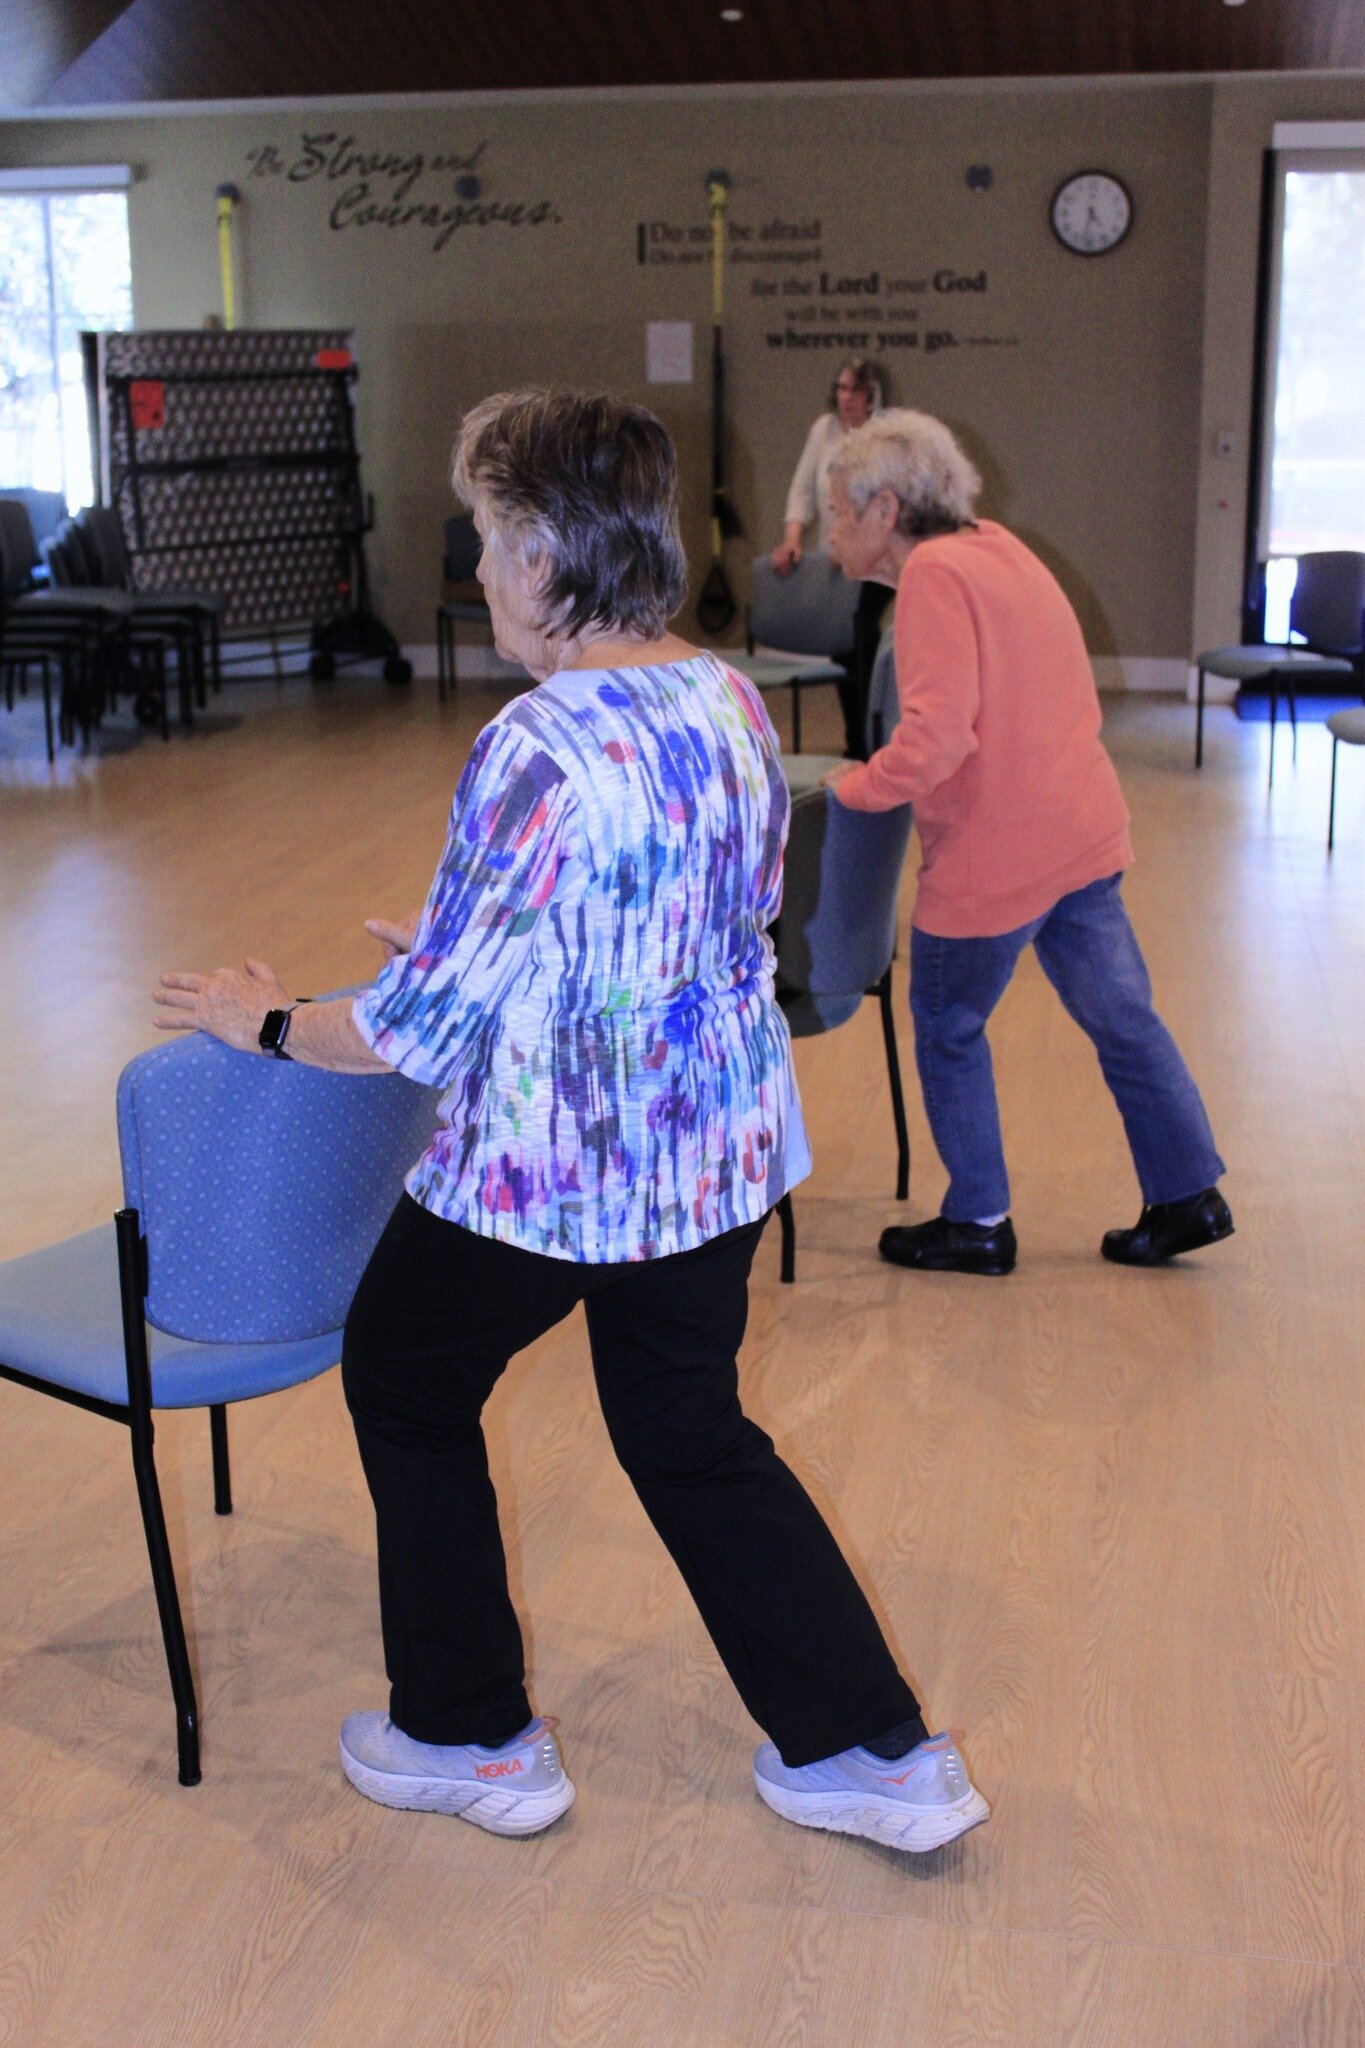 Chair yoga improves strength, improves balance, helps with arthritis, reduces joint pain, and reduces the fear of falls! Have you done your Mountain Pose today?
#healthandwellness #activeseniors #seniorliving #retirement #montevistagrovehomes